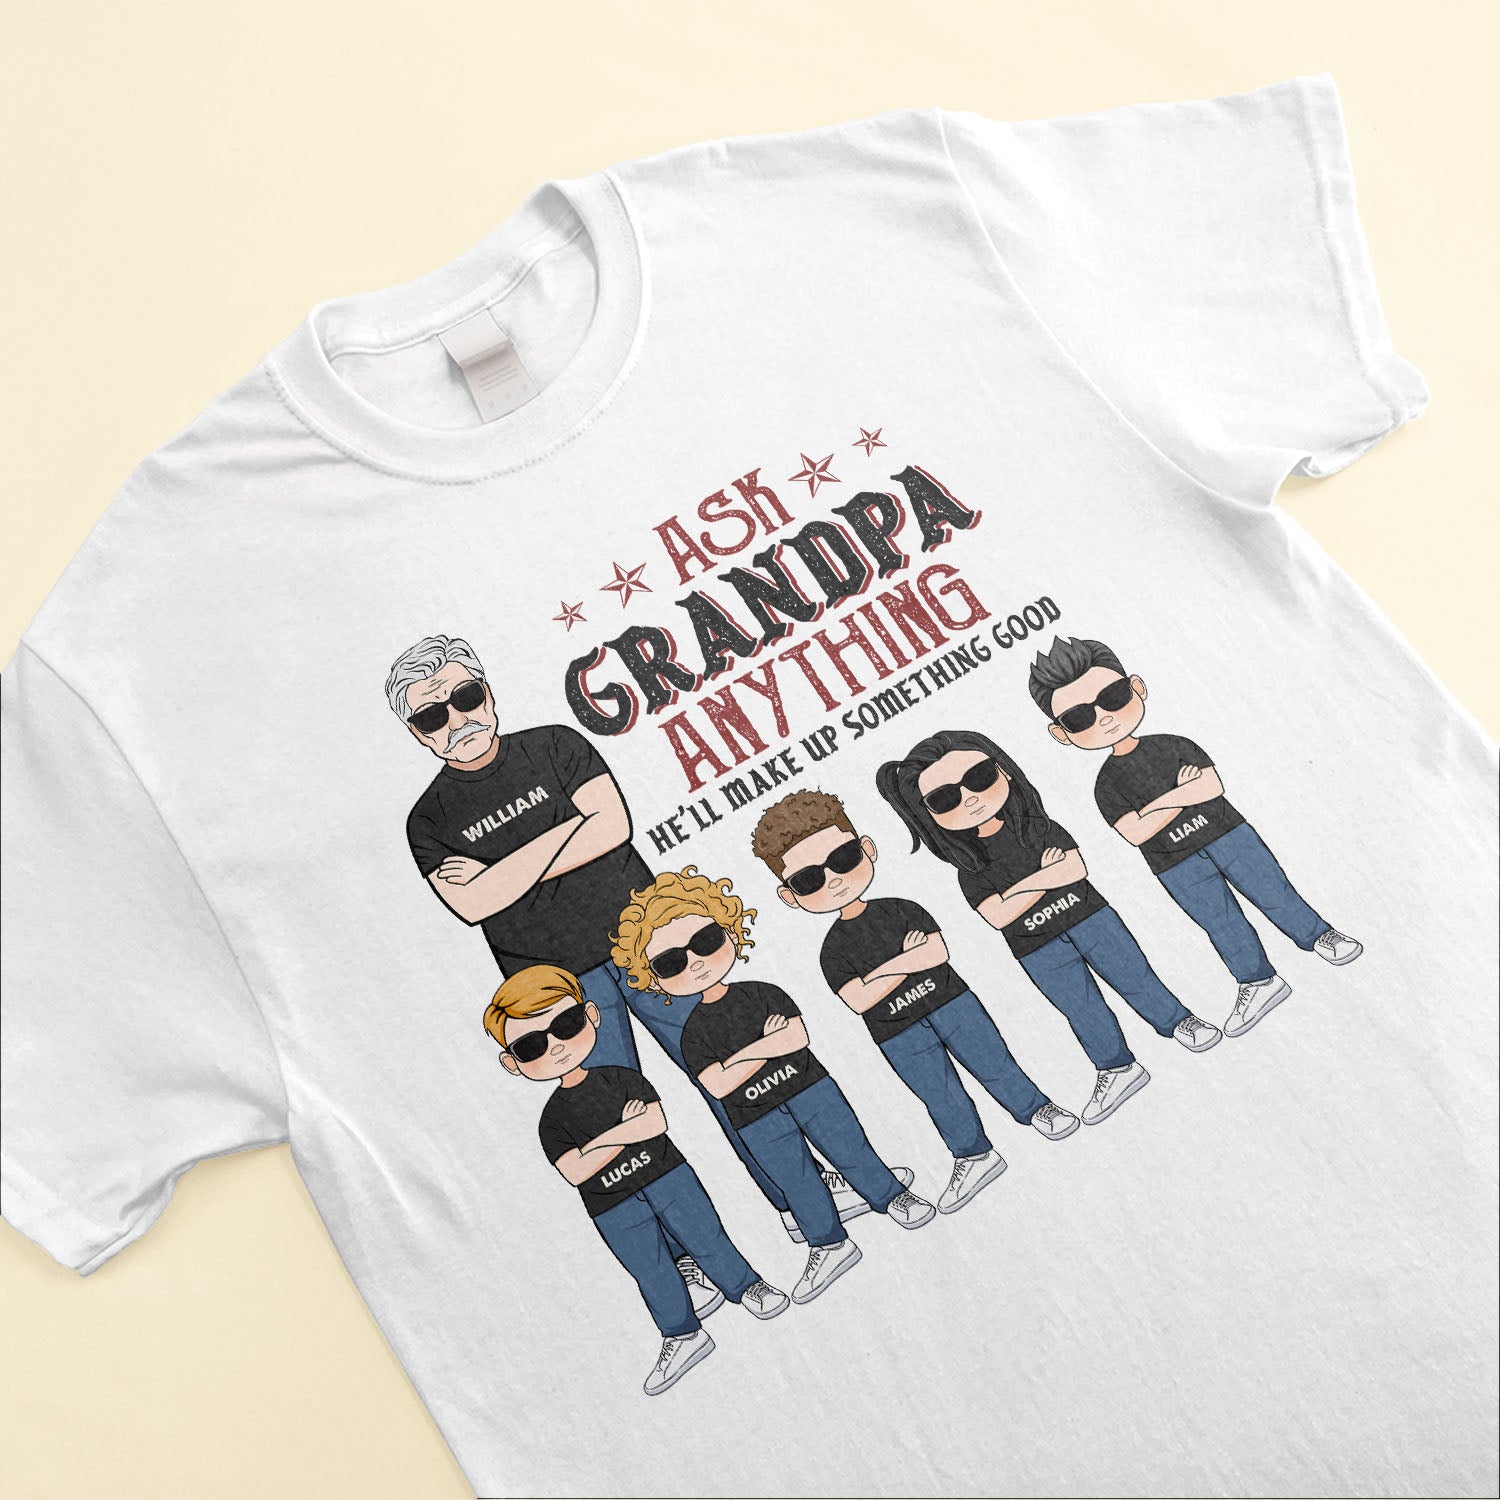 Ask Grandpa Anything - Personalized Shirt - Birthday, Father's Day Gift For Papa, Grandpa, Grandfather